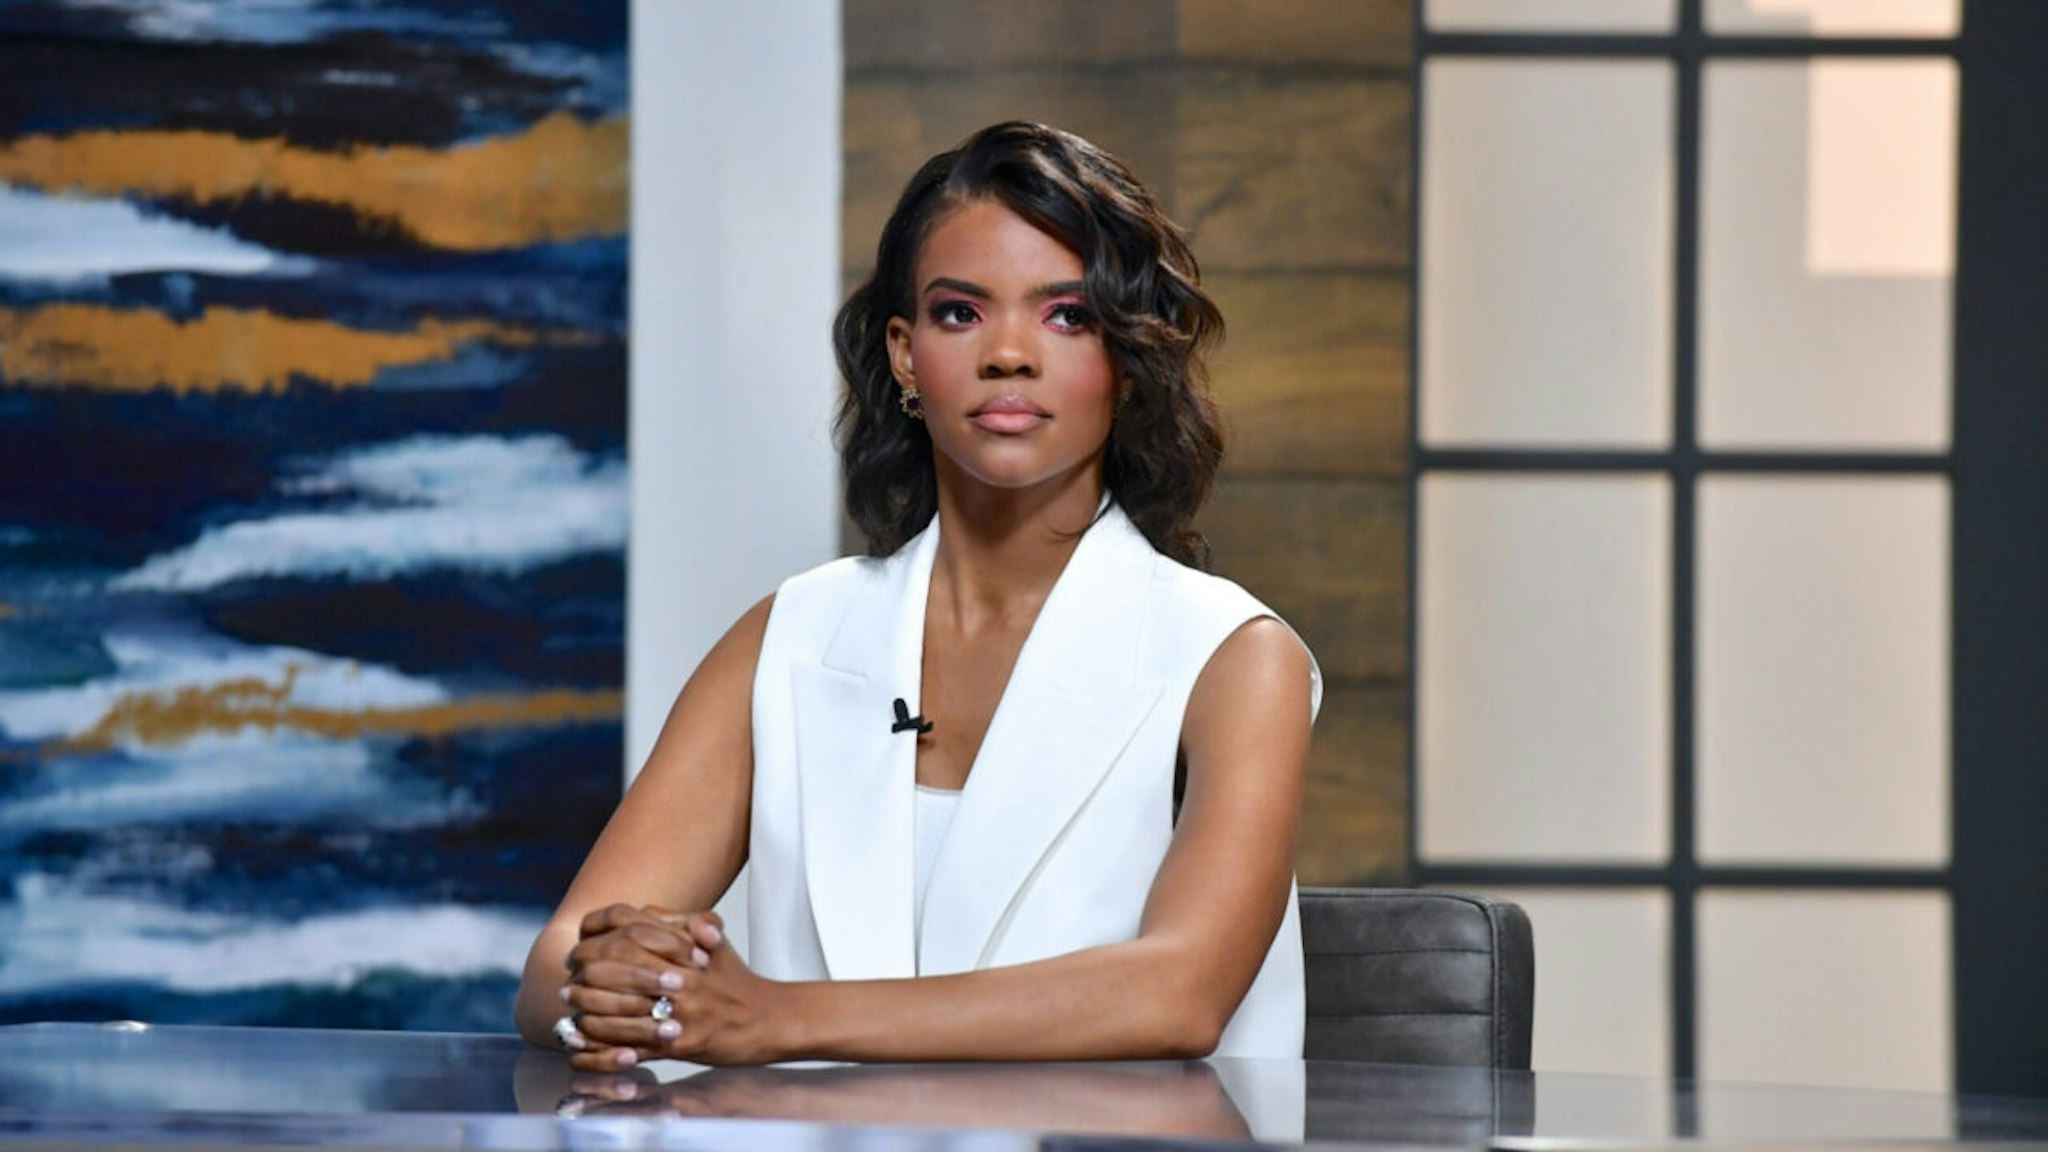 Candace Owens is seen on set of "Candace" on June 25, 2021 in Nashville, Tennessee.